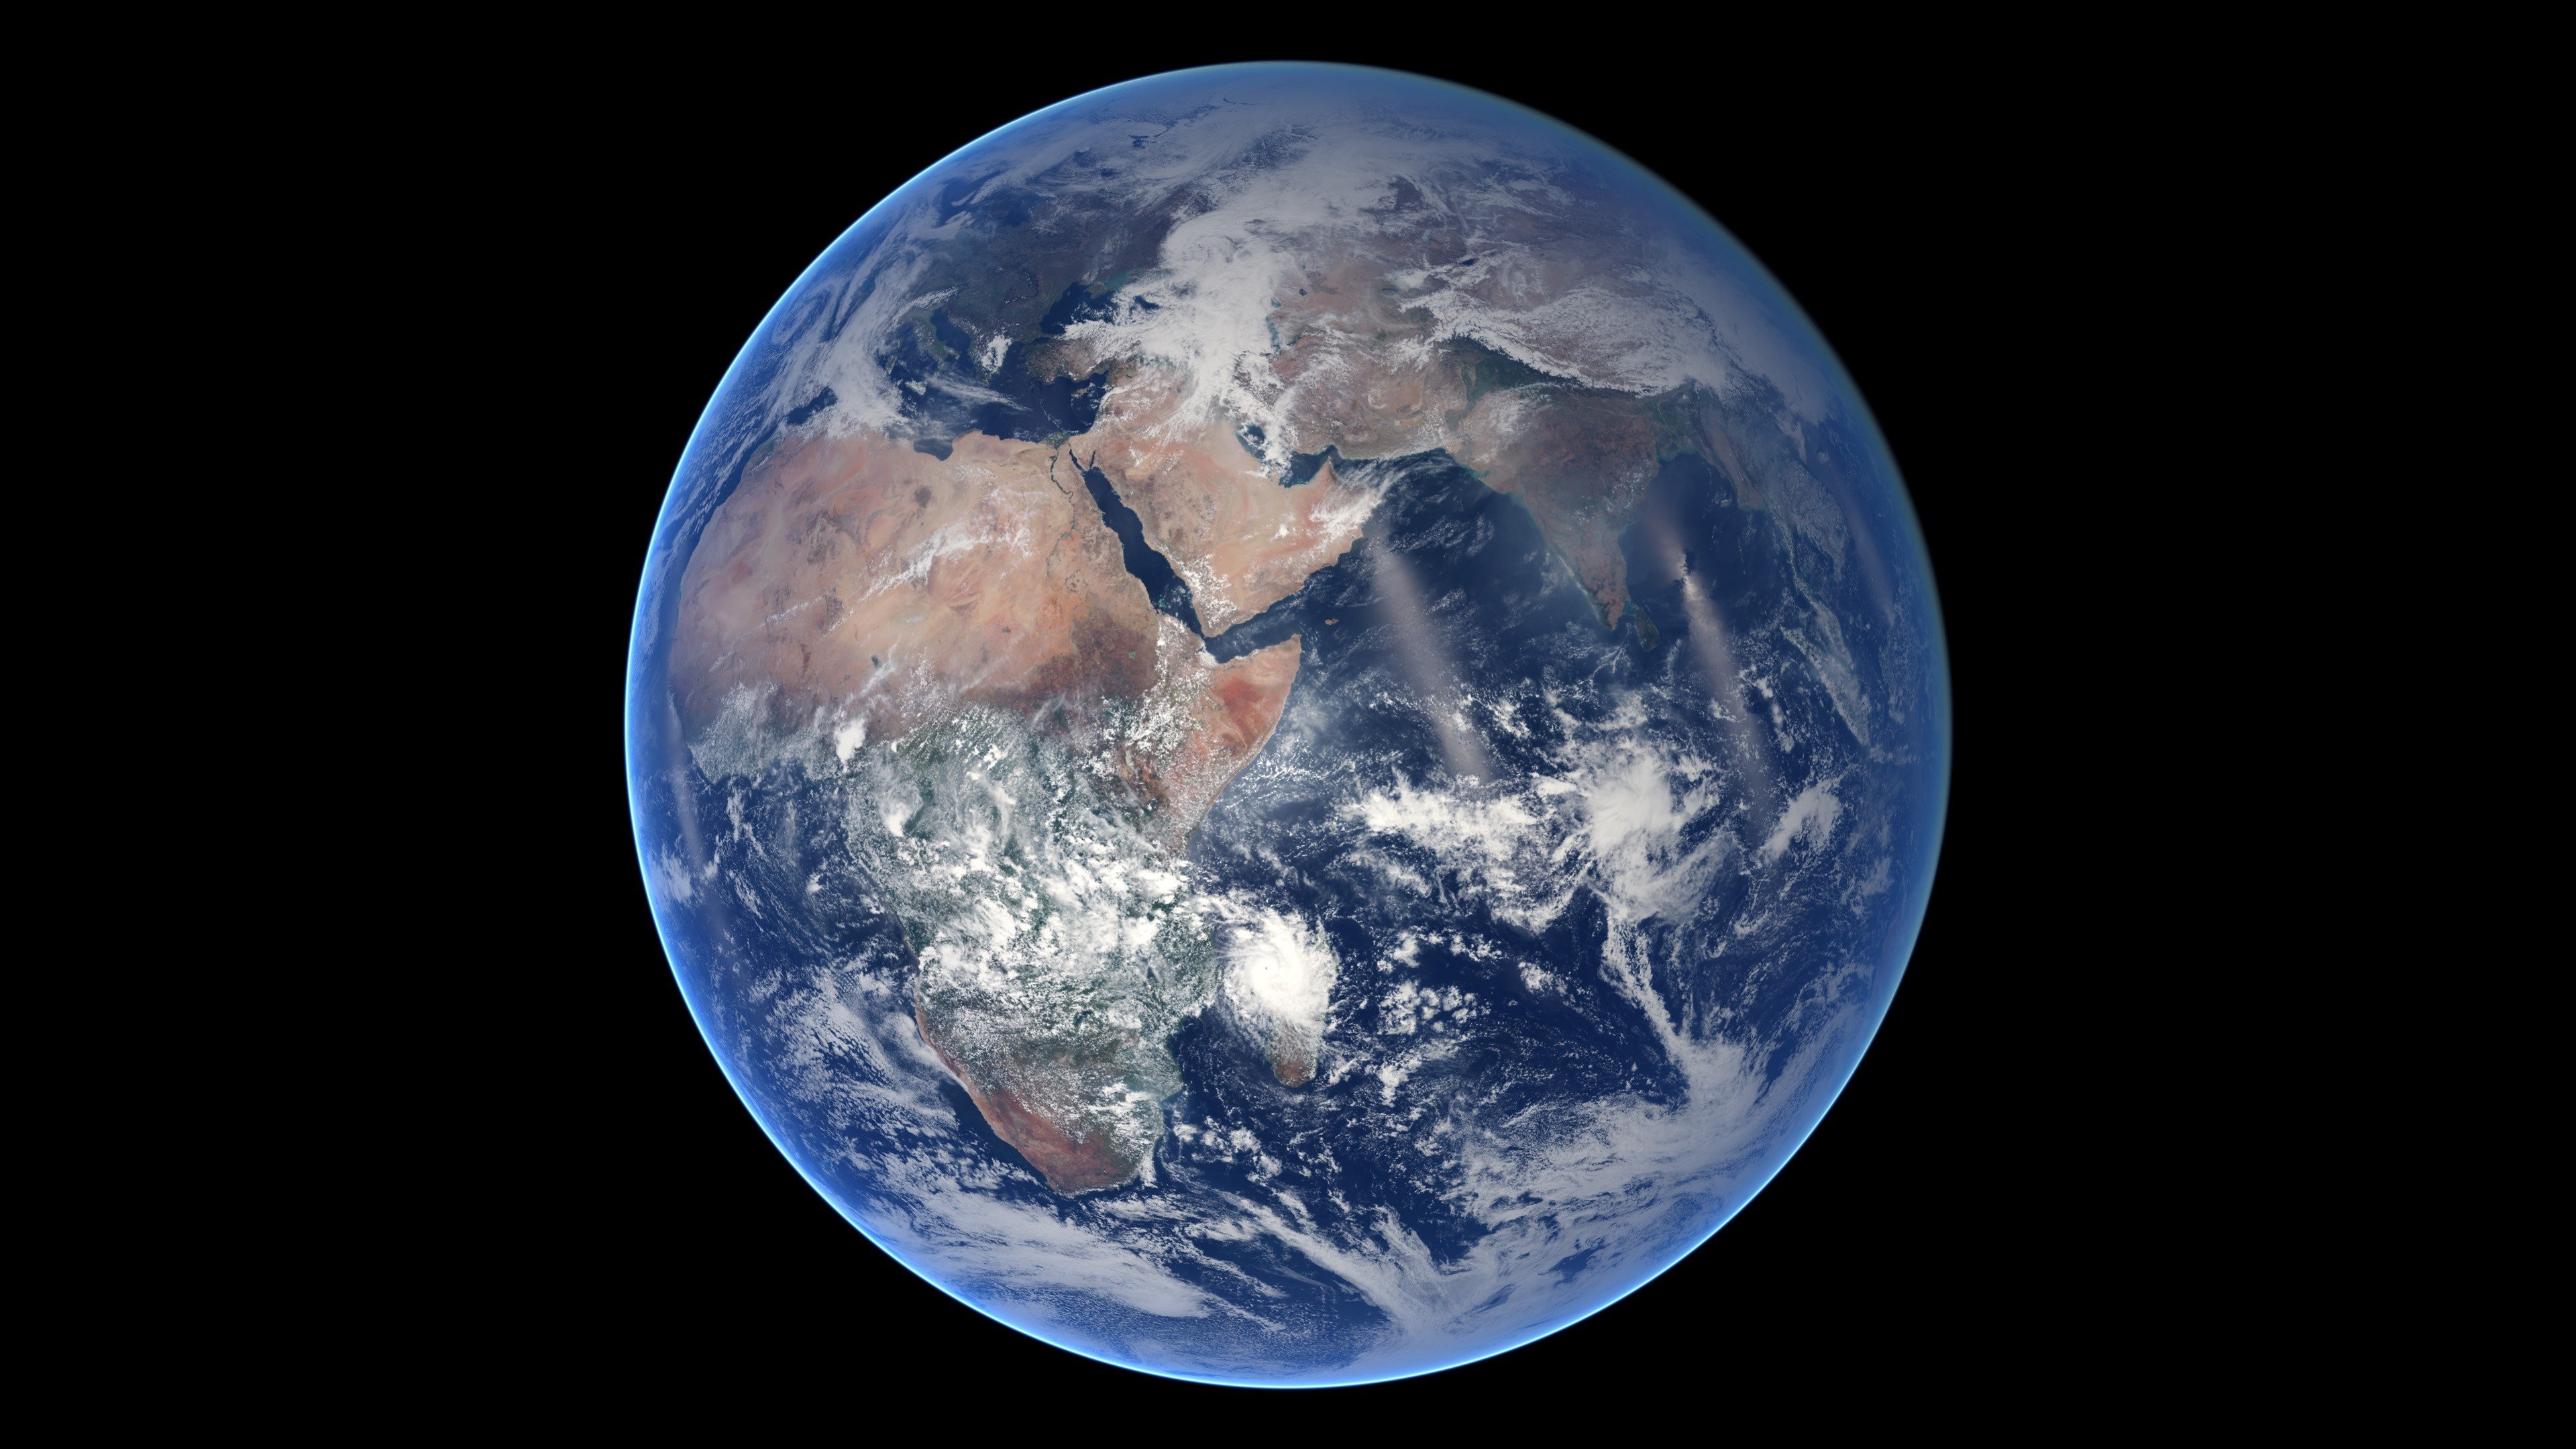 3840x2160 Earth Space Planets Satellite View Blue Marble NASA